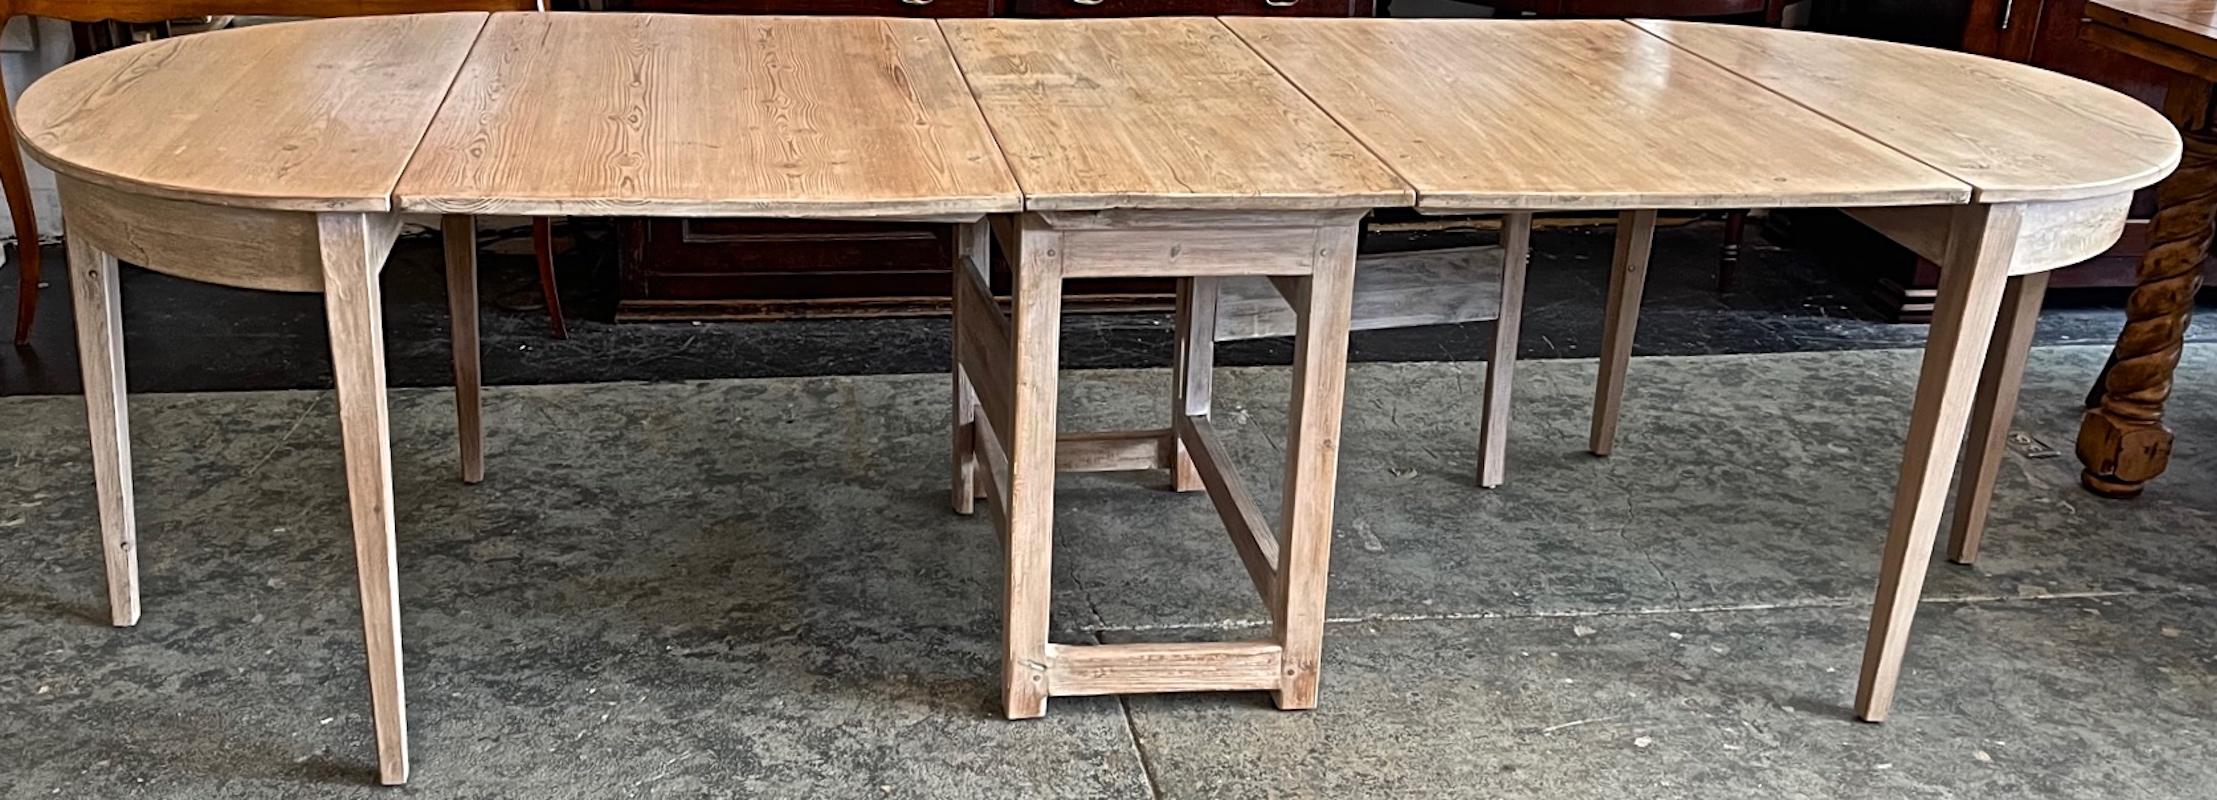 Swedish 19th Century 3 Piece Oblong Dining or Conference Table In Distressed Condition In Santa Monica, CA